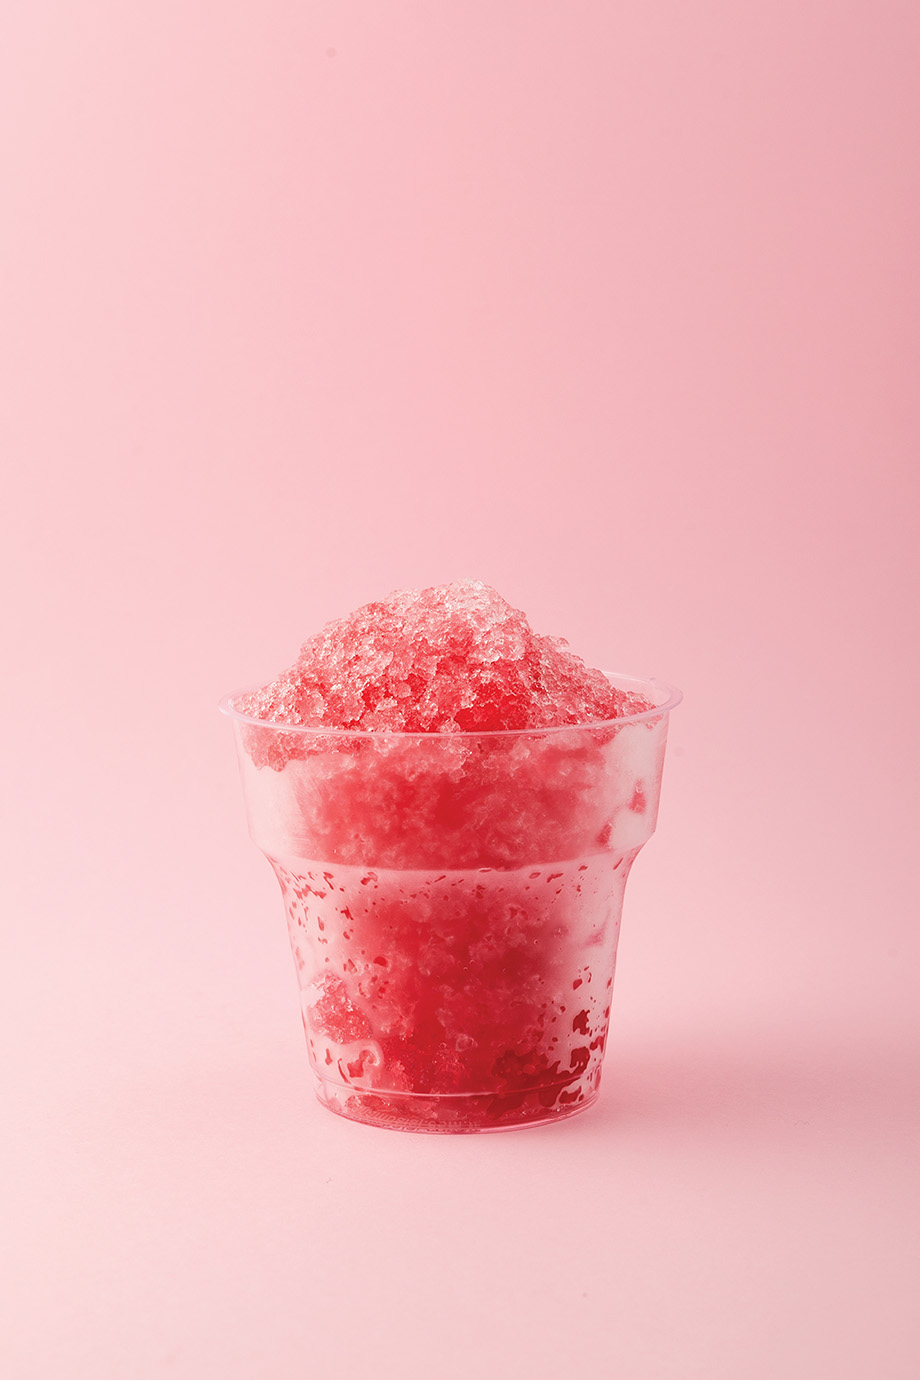 Slushie or Slush - drink on pink background. Fruit shaved ice in disposable plastic cup. Take away food. Refreshing summer drink. Vertical orientation, copy space.